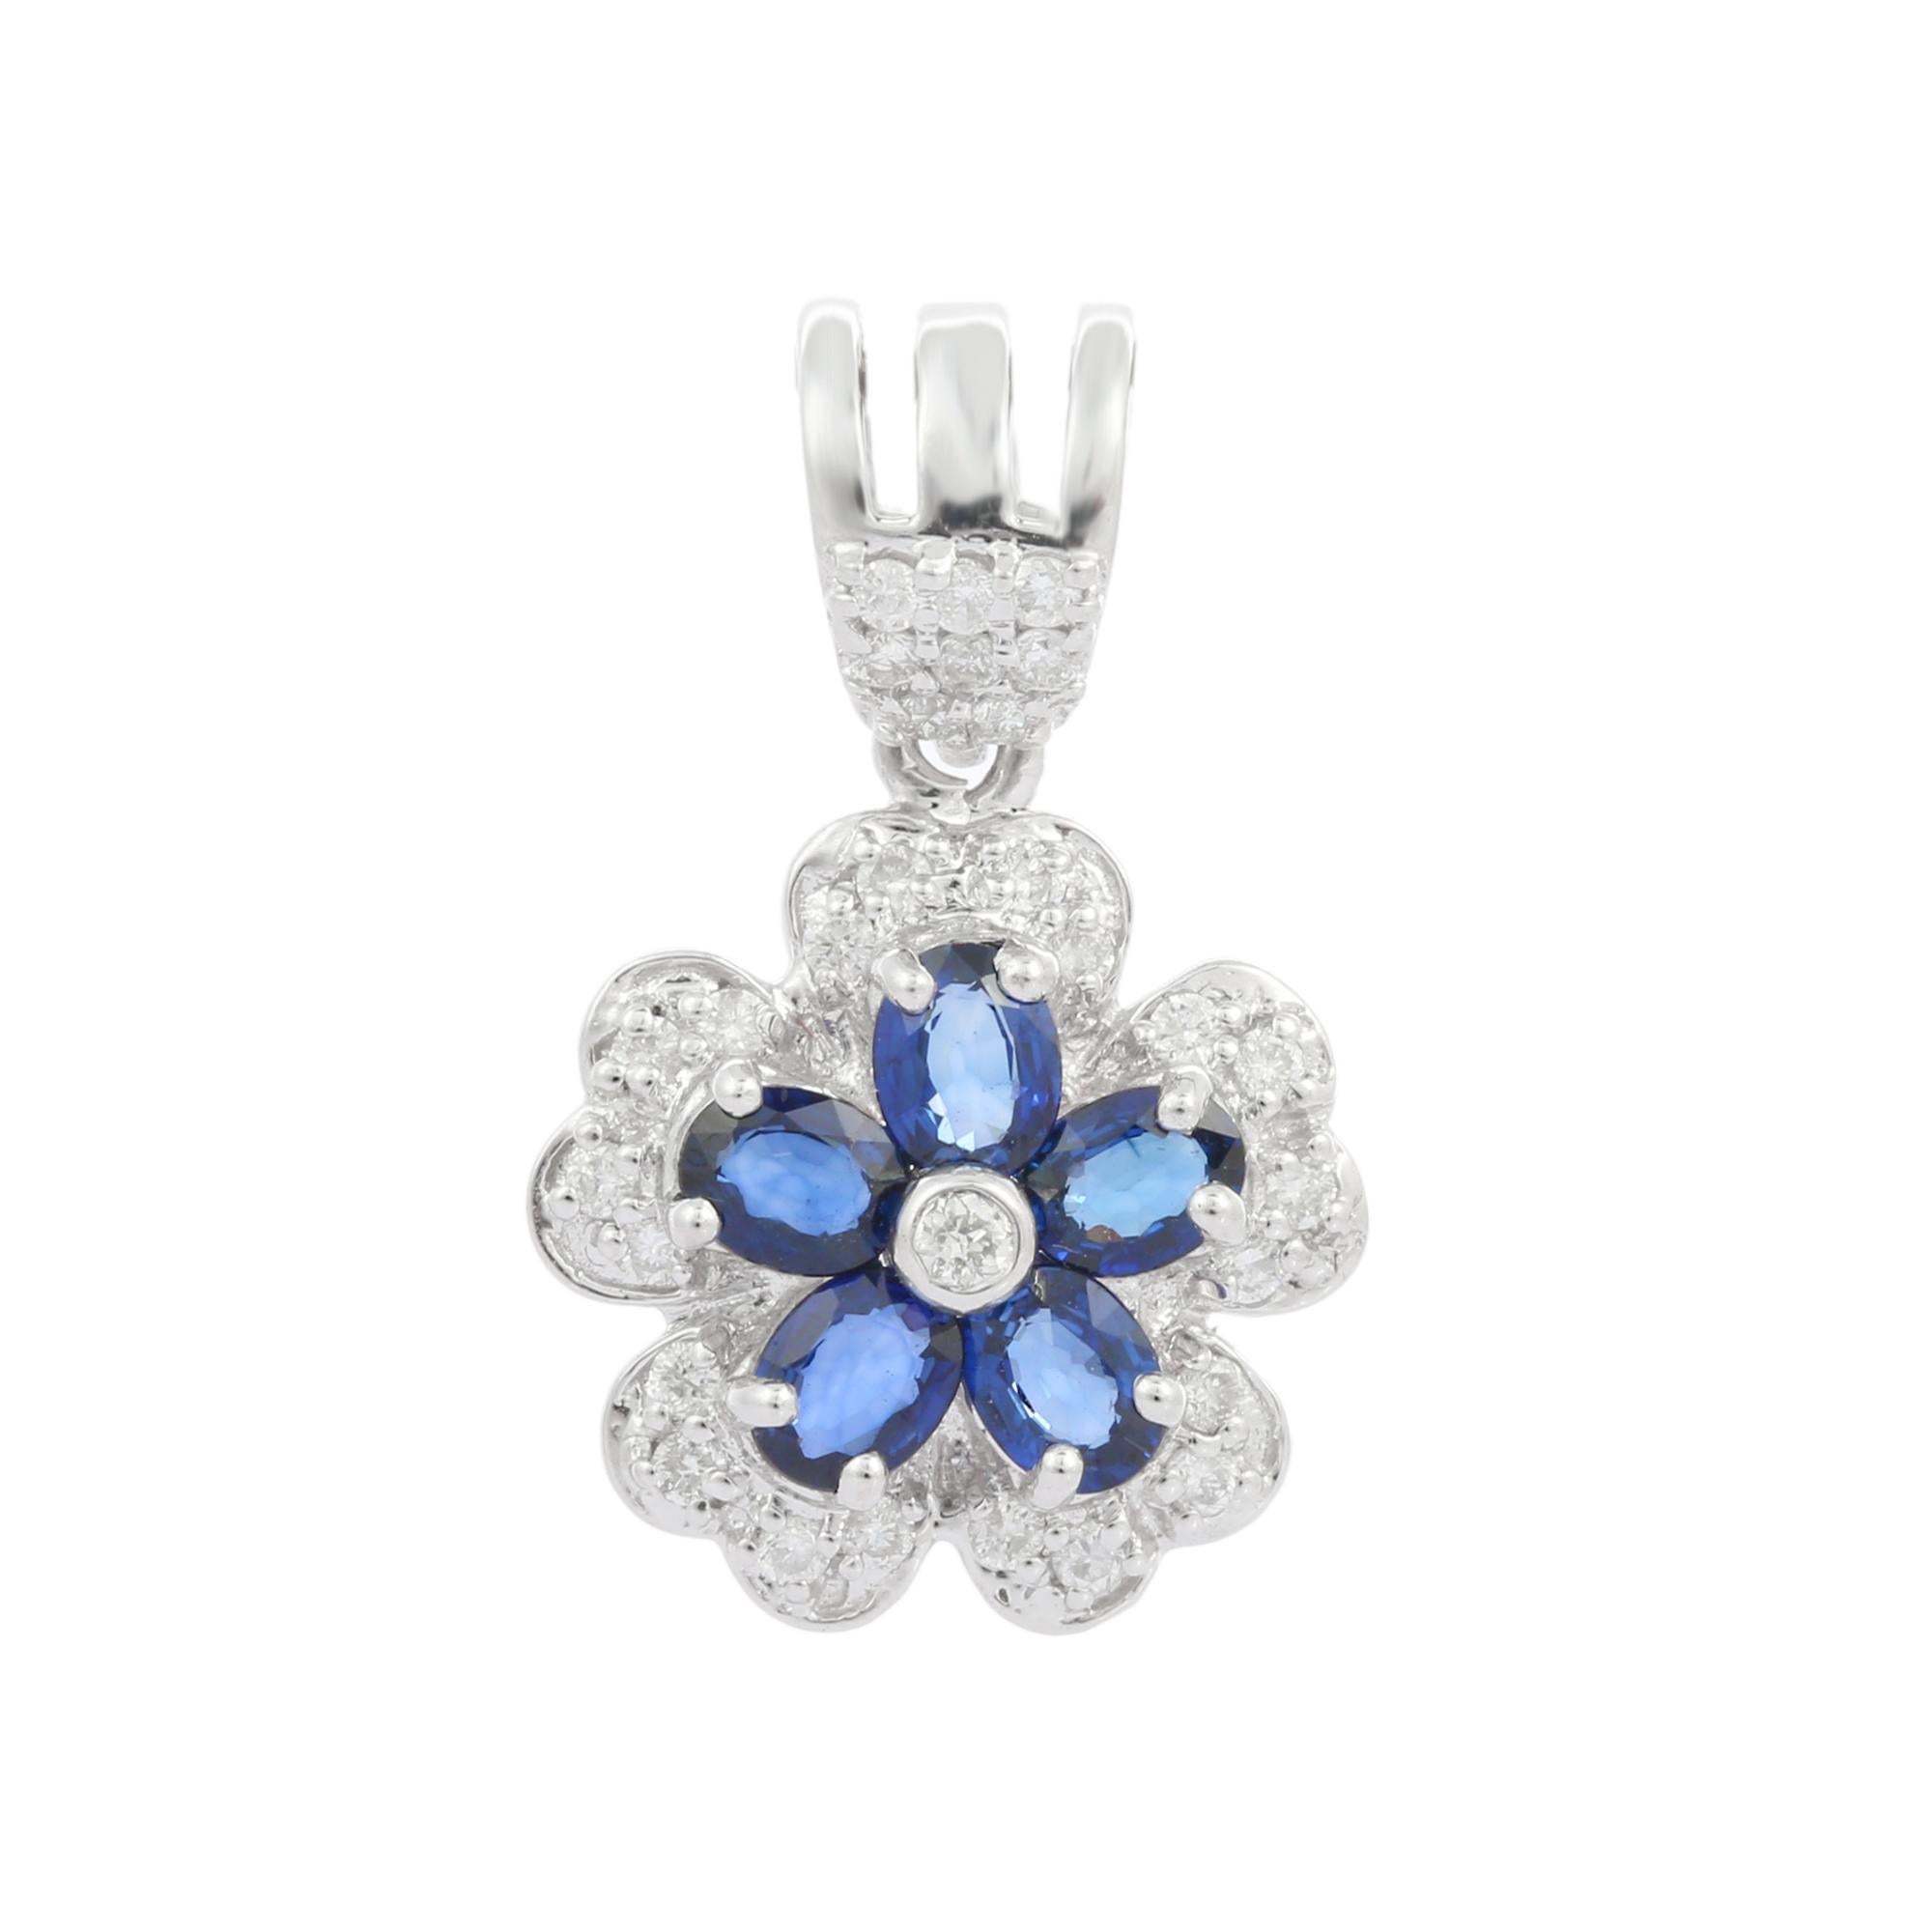 Natural Blue Sapphire pendant in 18K Gold. It has a oval cut sapphires studded with clustered diamonds that completes your look with a decent touch. Pendants are used to wear or gifted to represent love and promises. It's an attractive jewelry piece